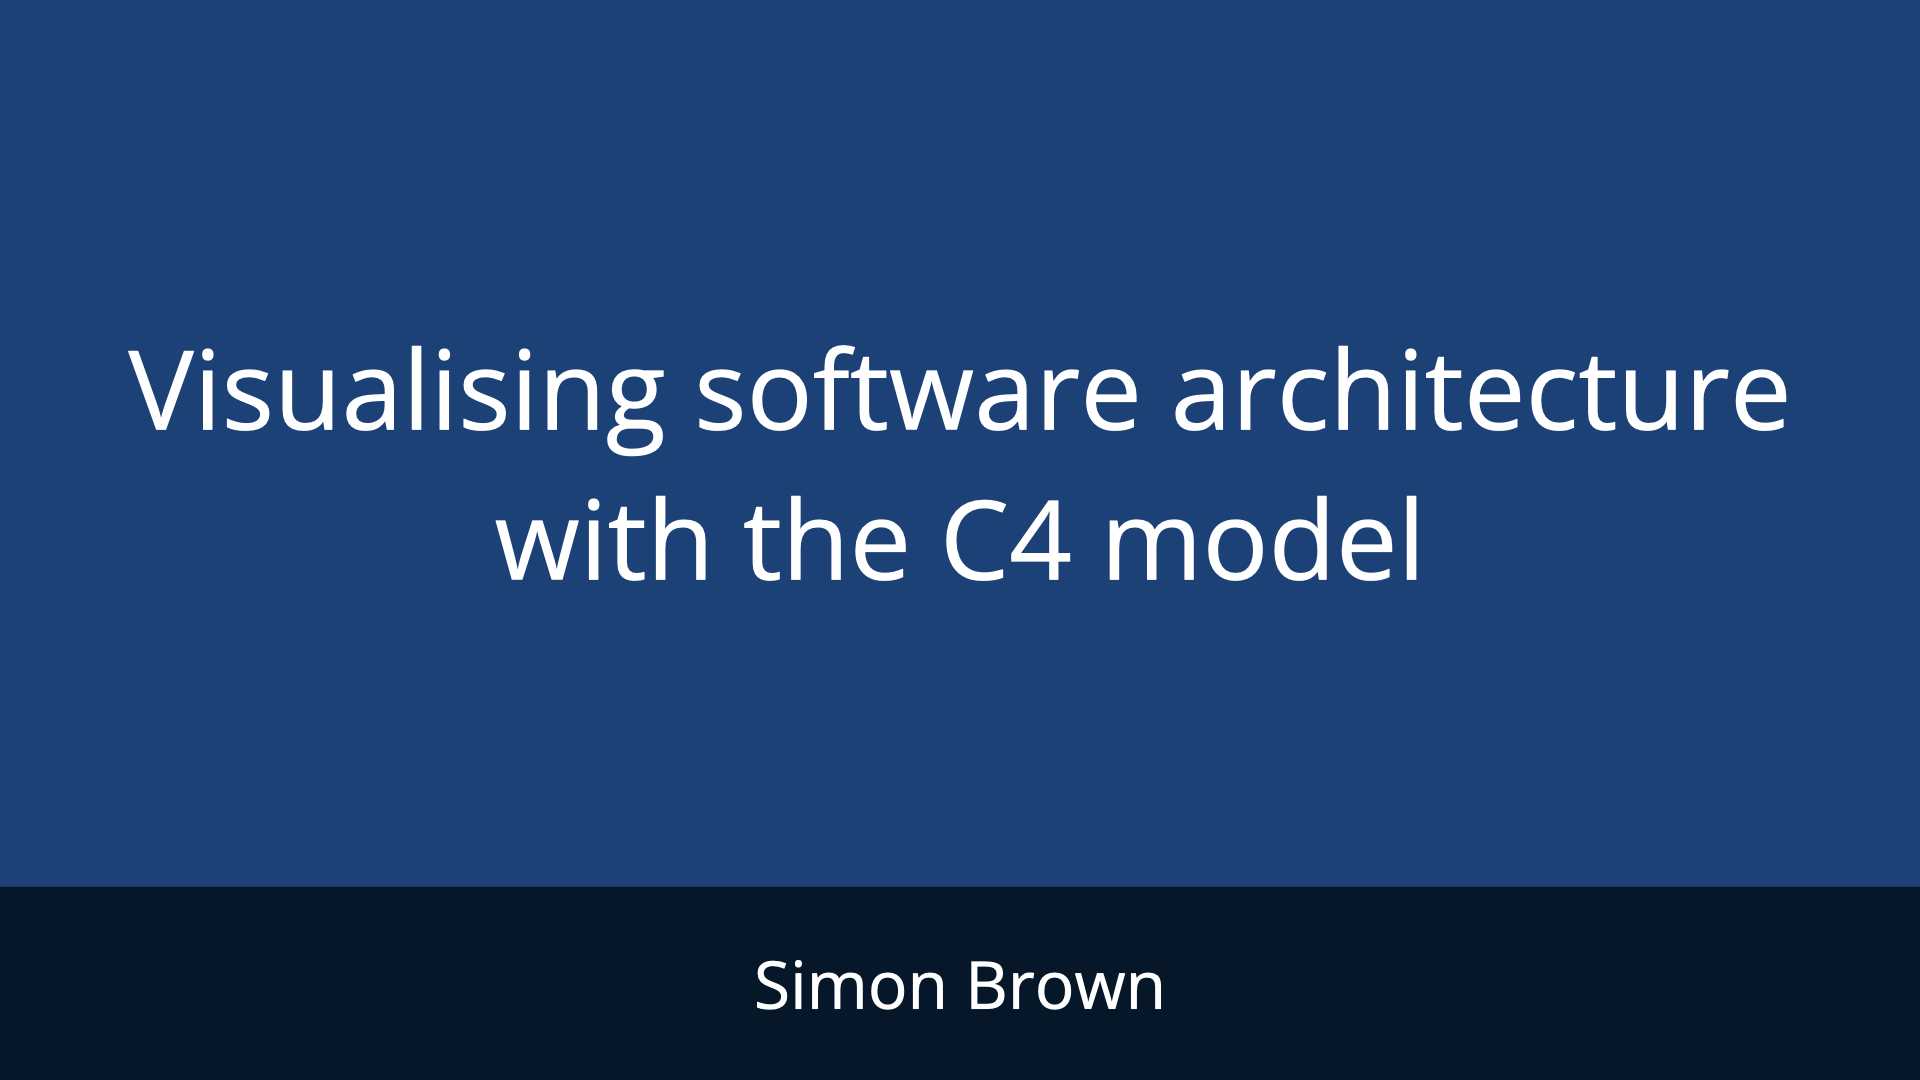 Visualising software architecture with the C4 model